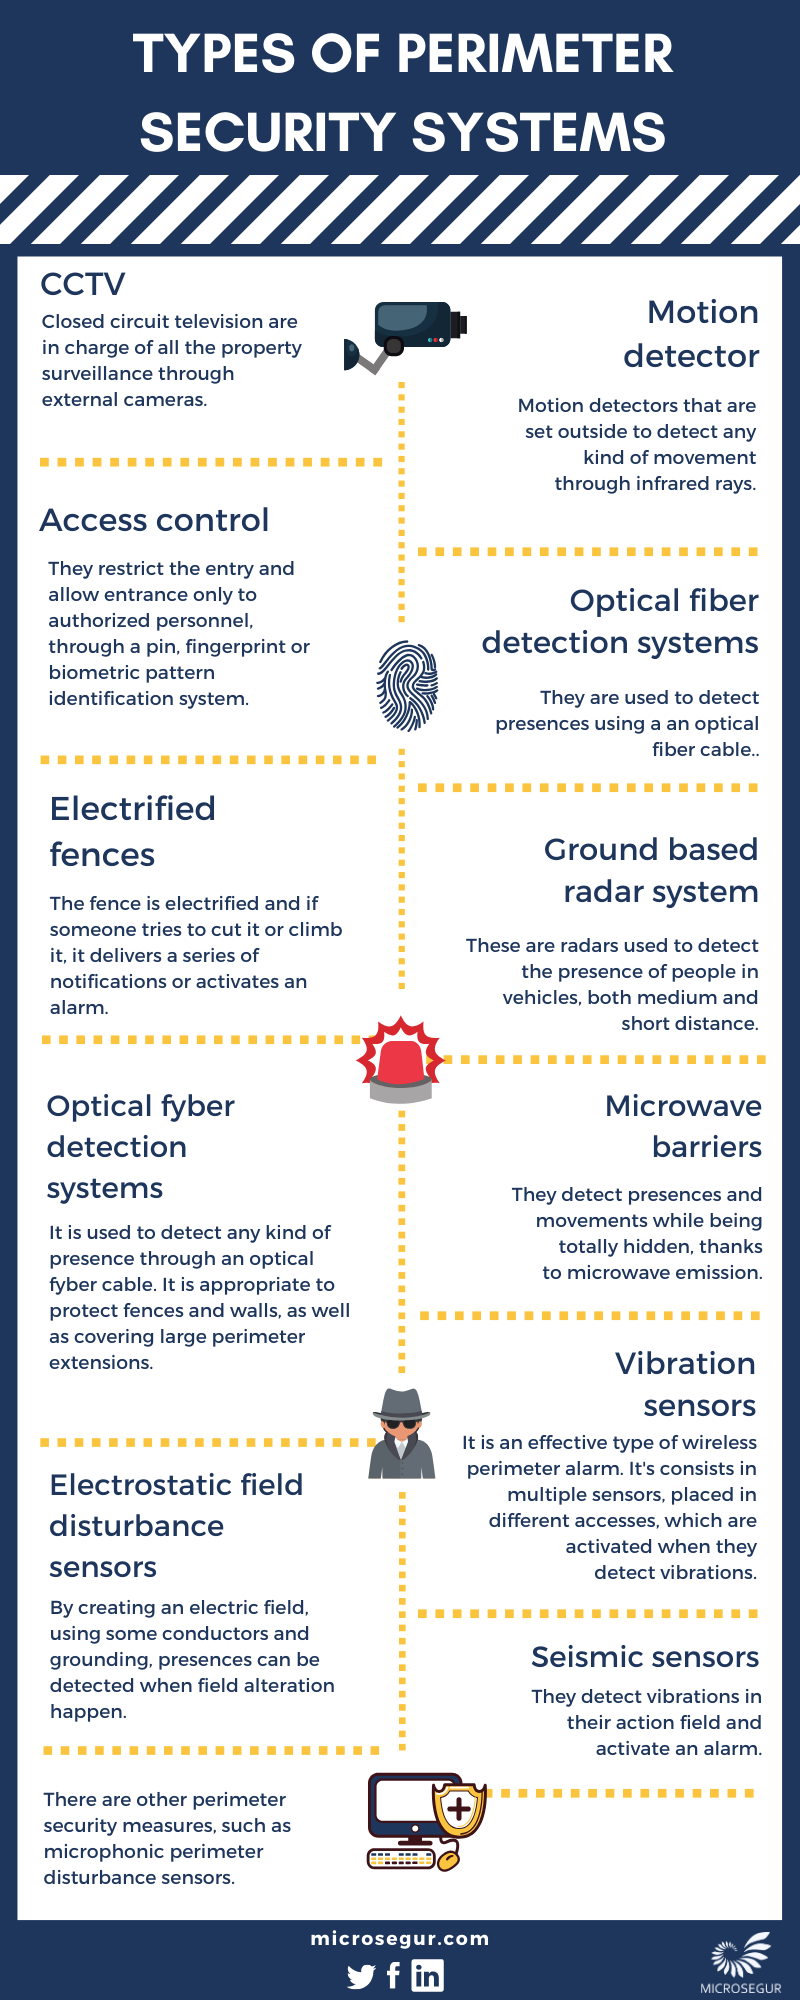 Types Of Perimeter Security Systems Microsegur